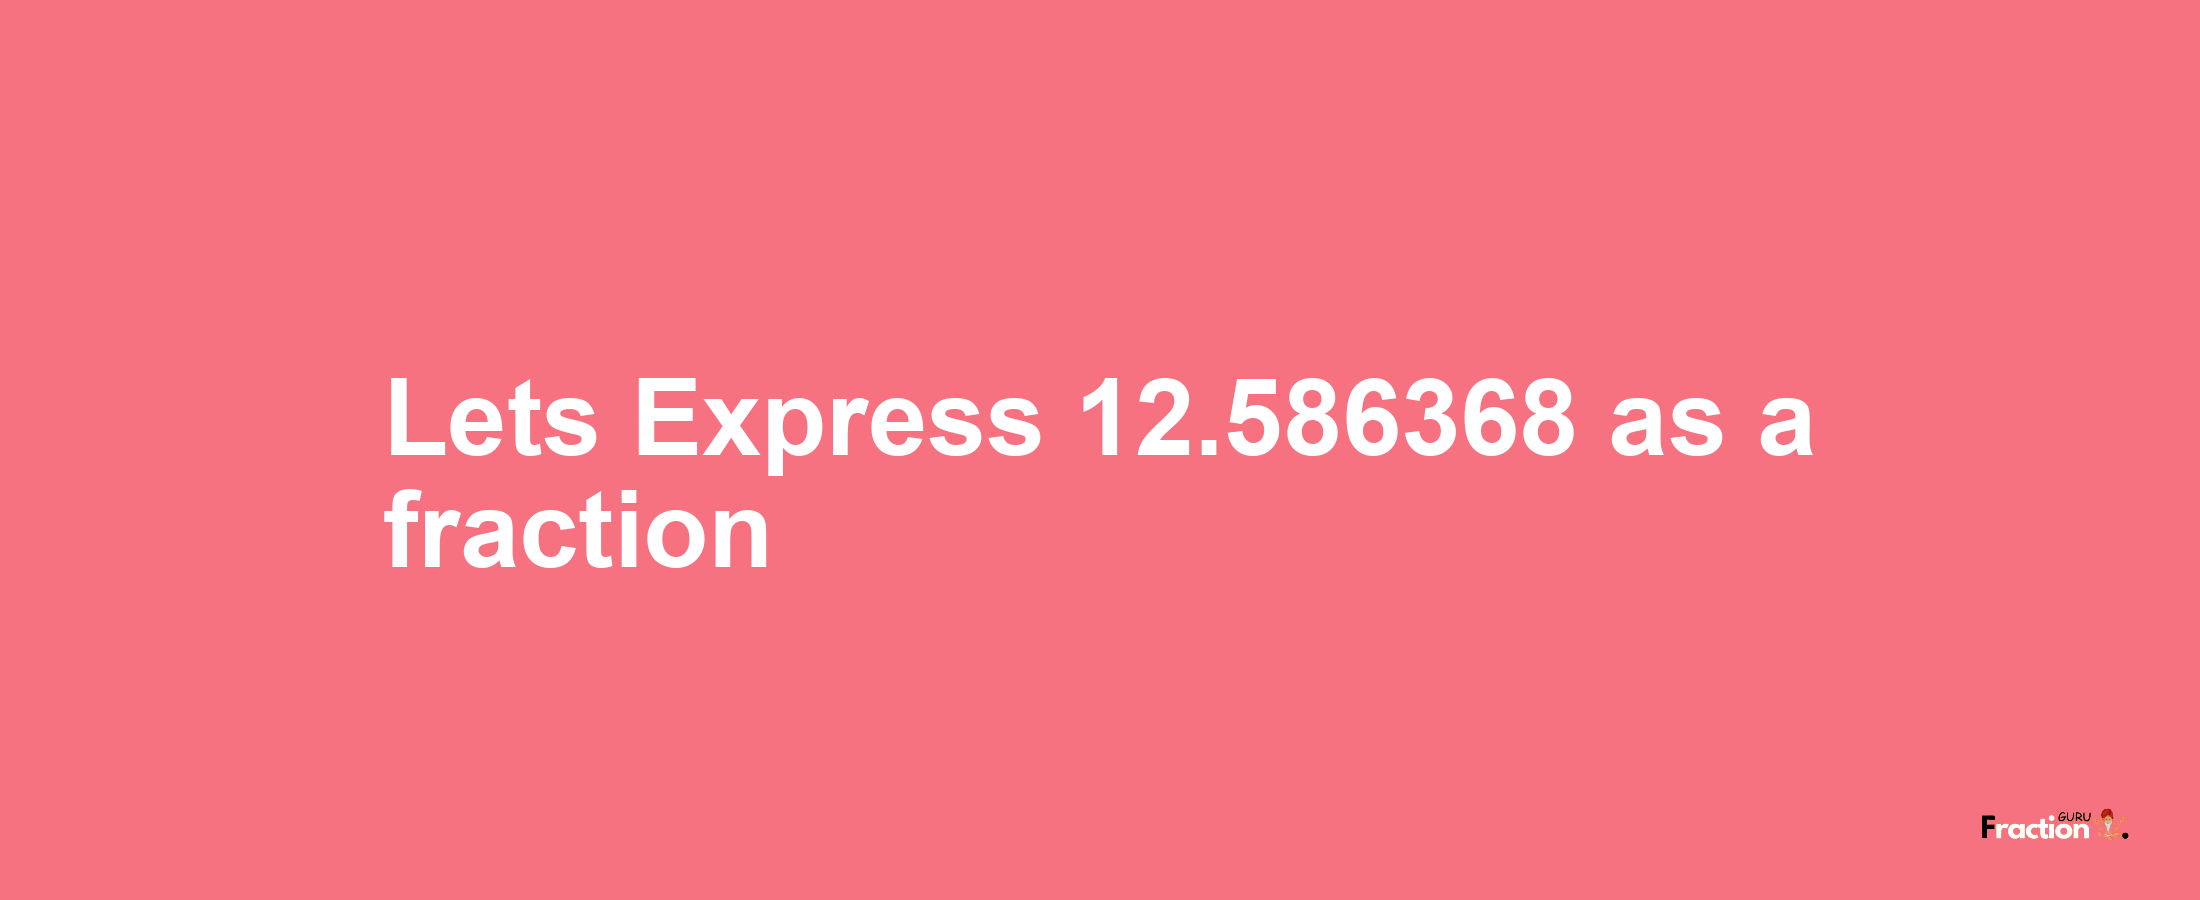 Lets Express 12.586368 as afraction